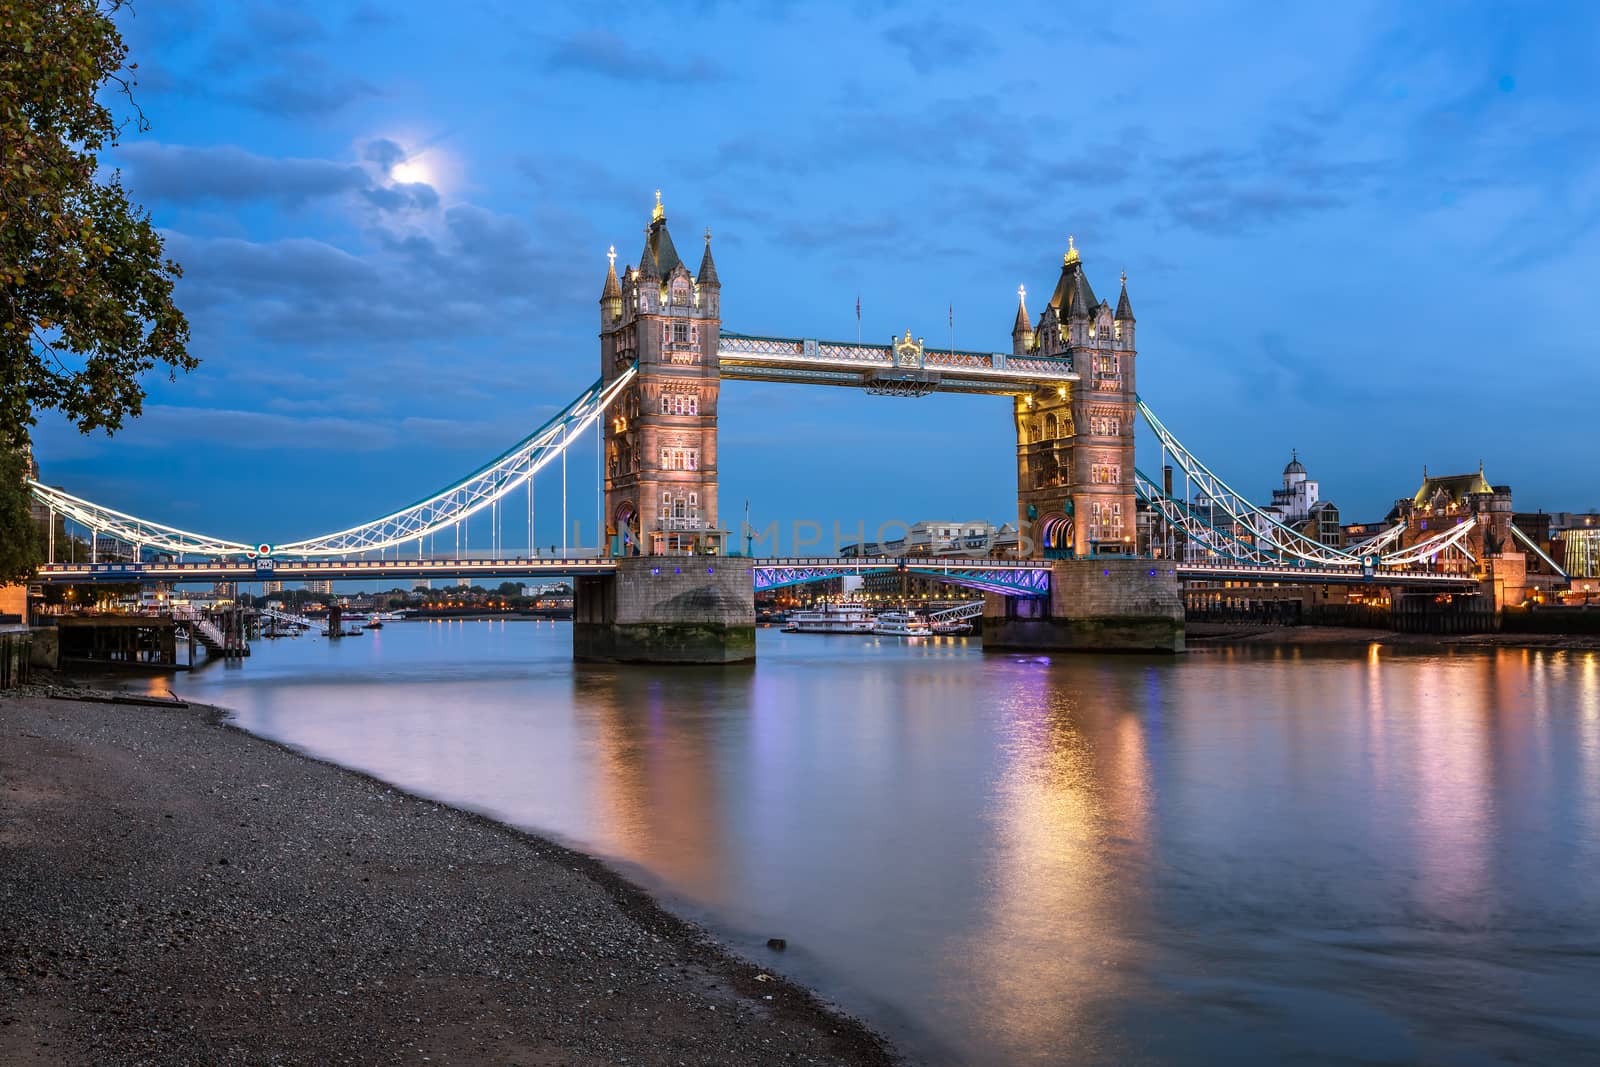 Tower Bridge and Thames River Lit by Moonlight at the Evening, London, United Kingdom